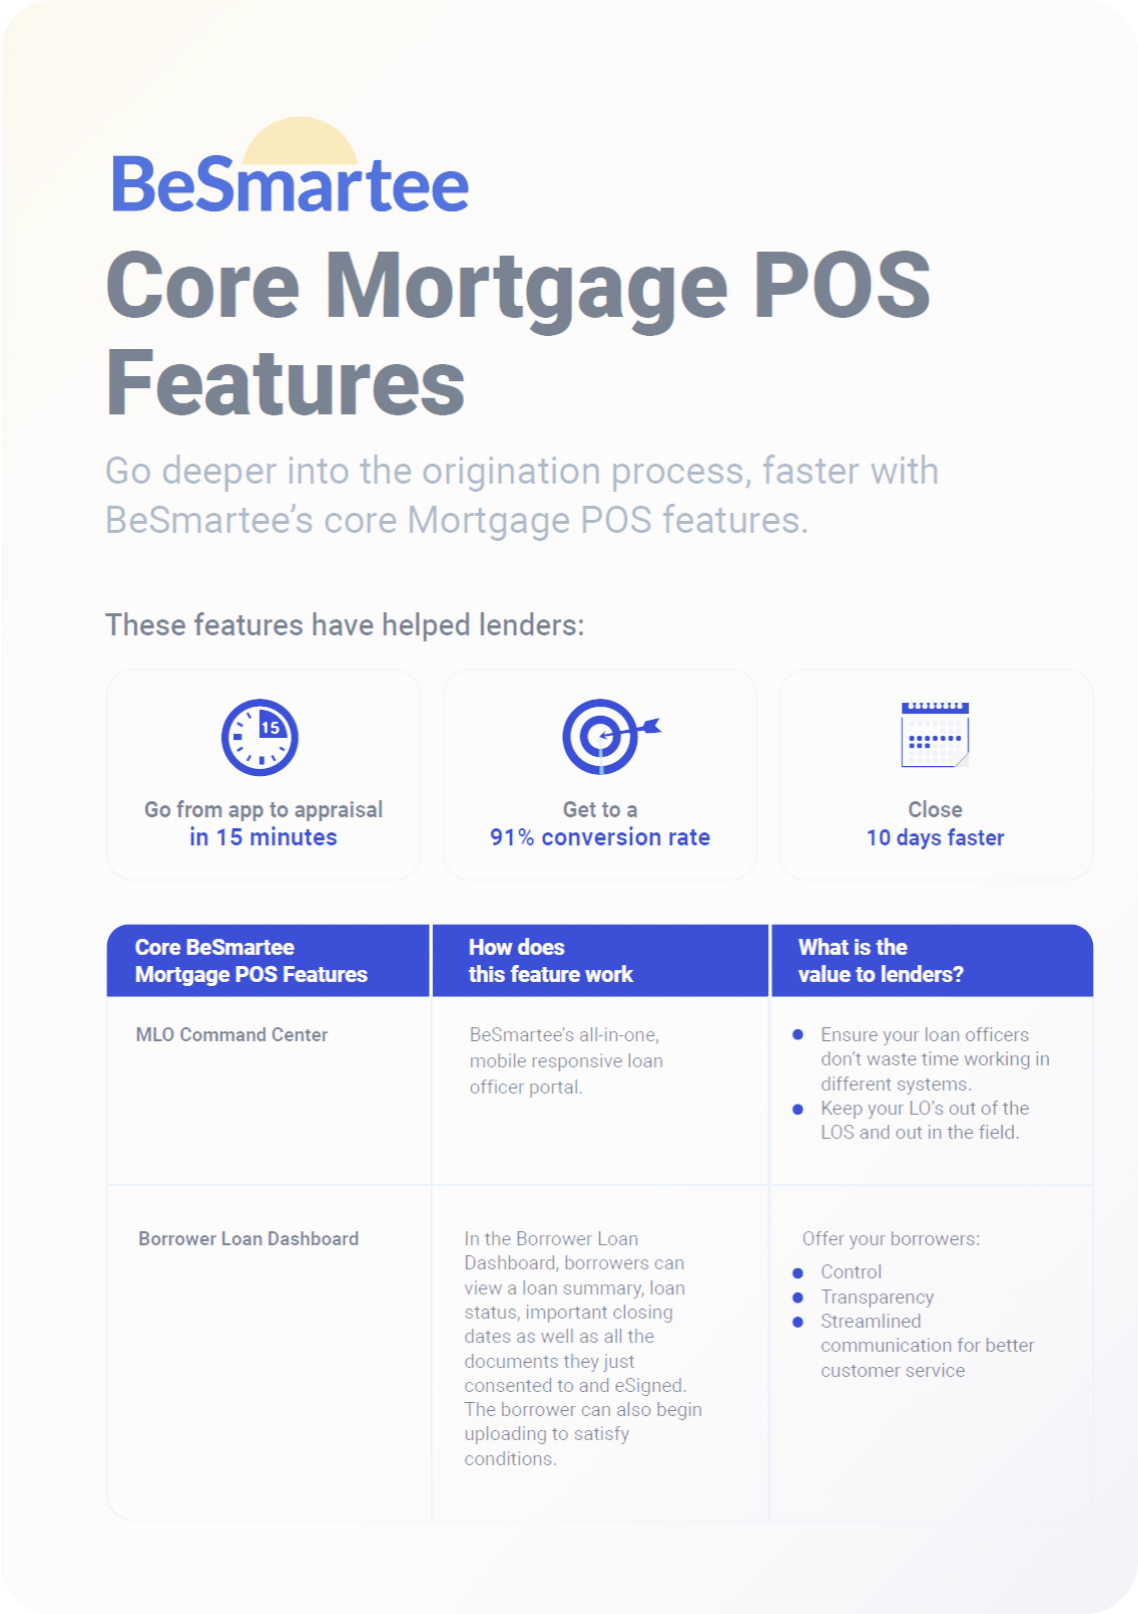 Core Mortgage POS Features